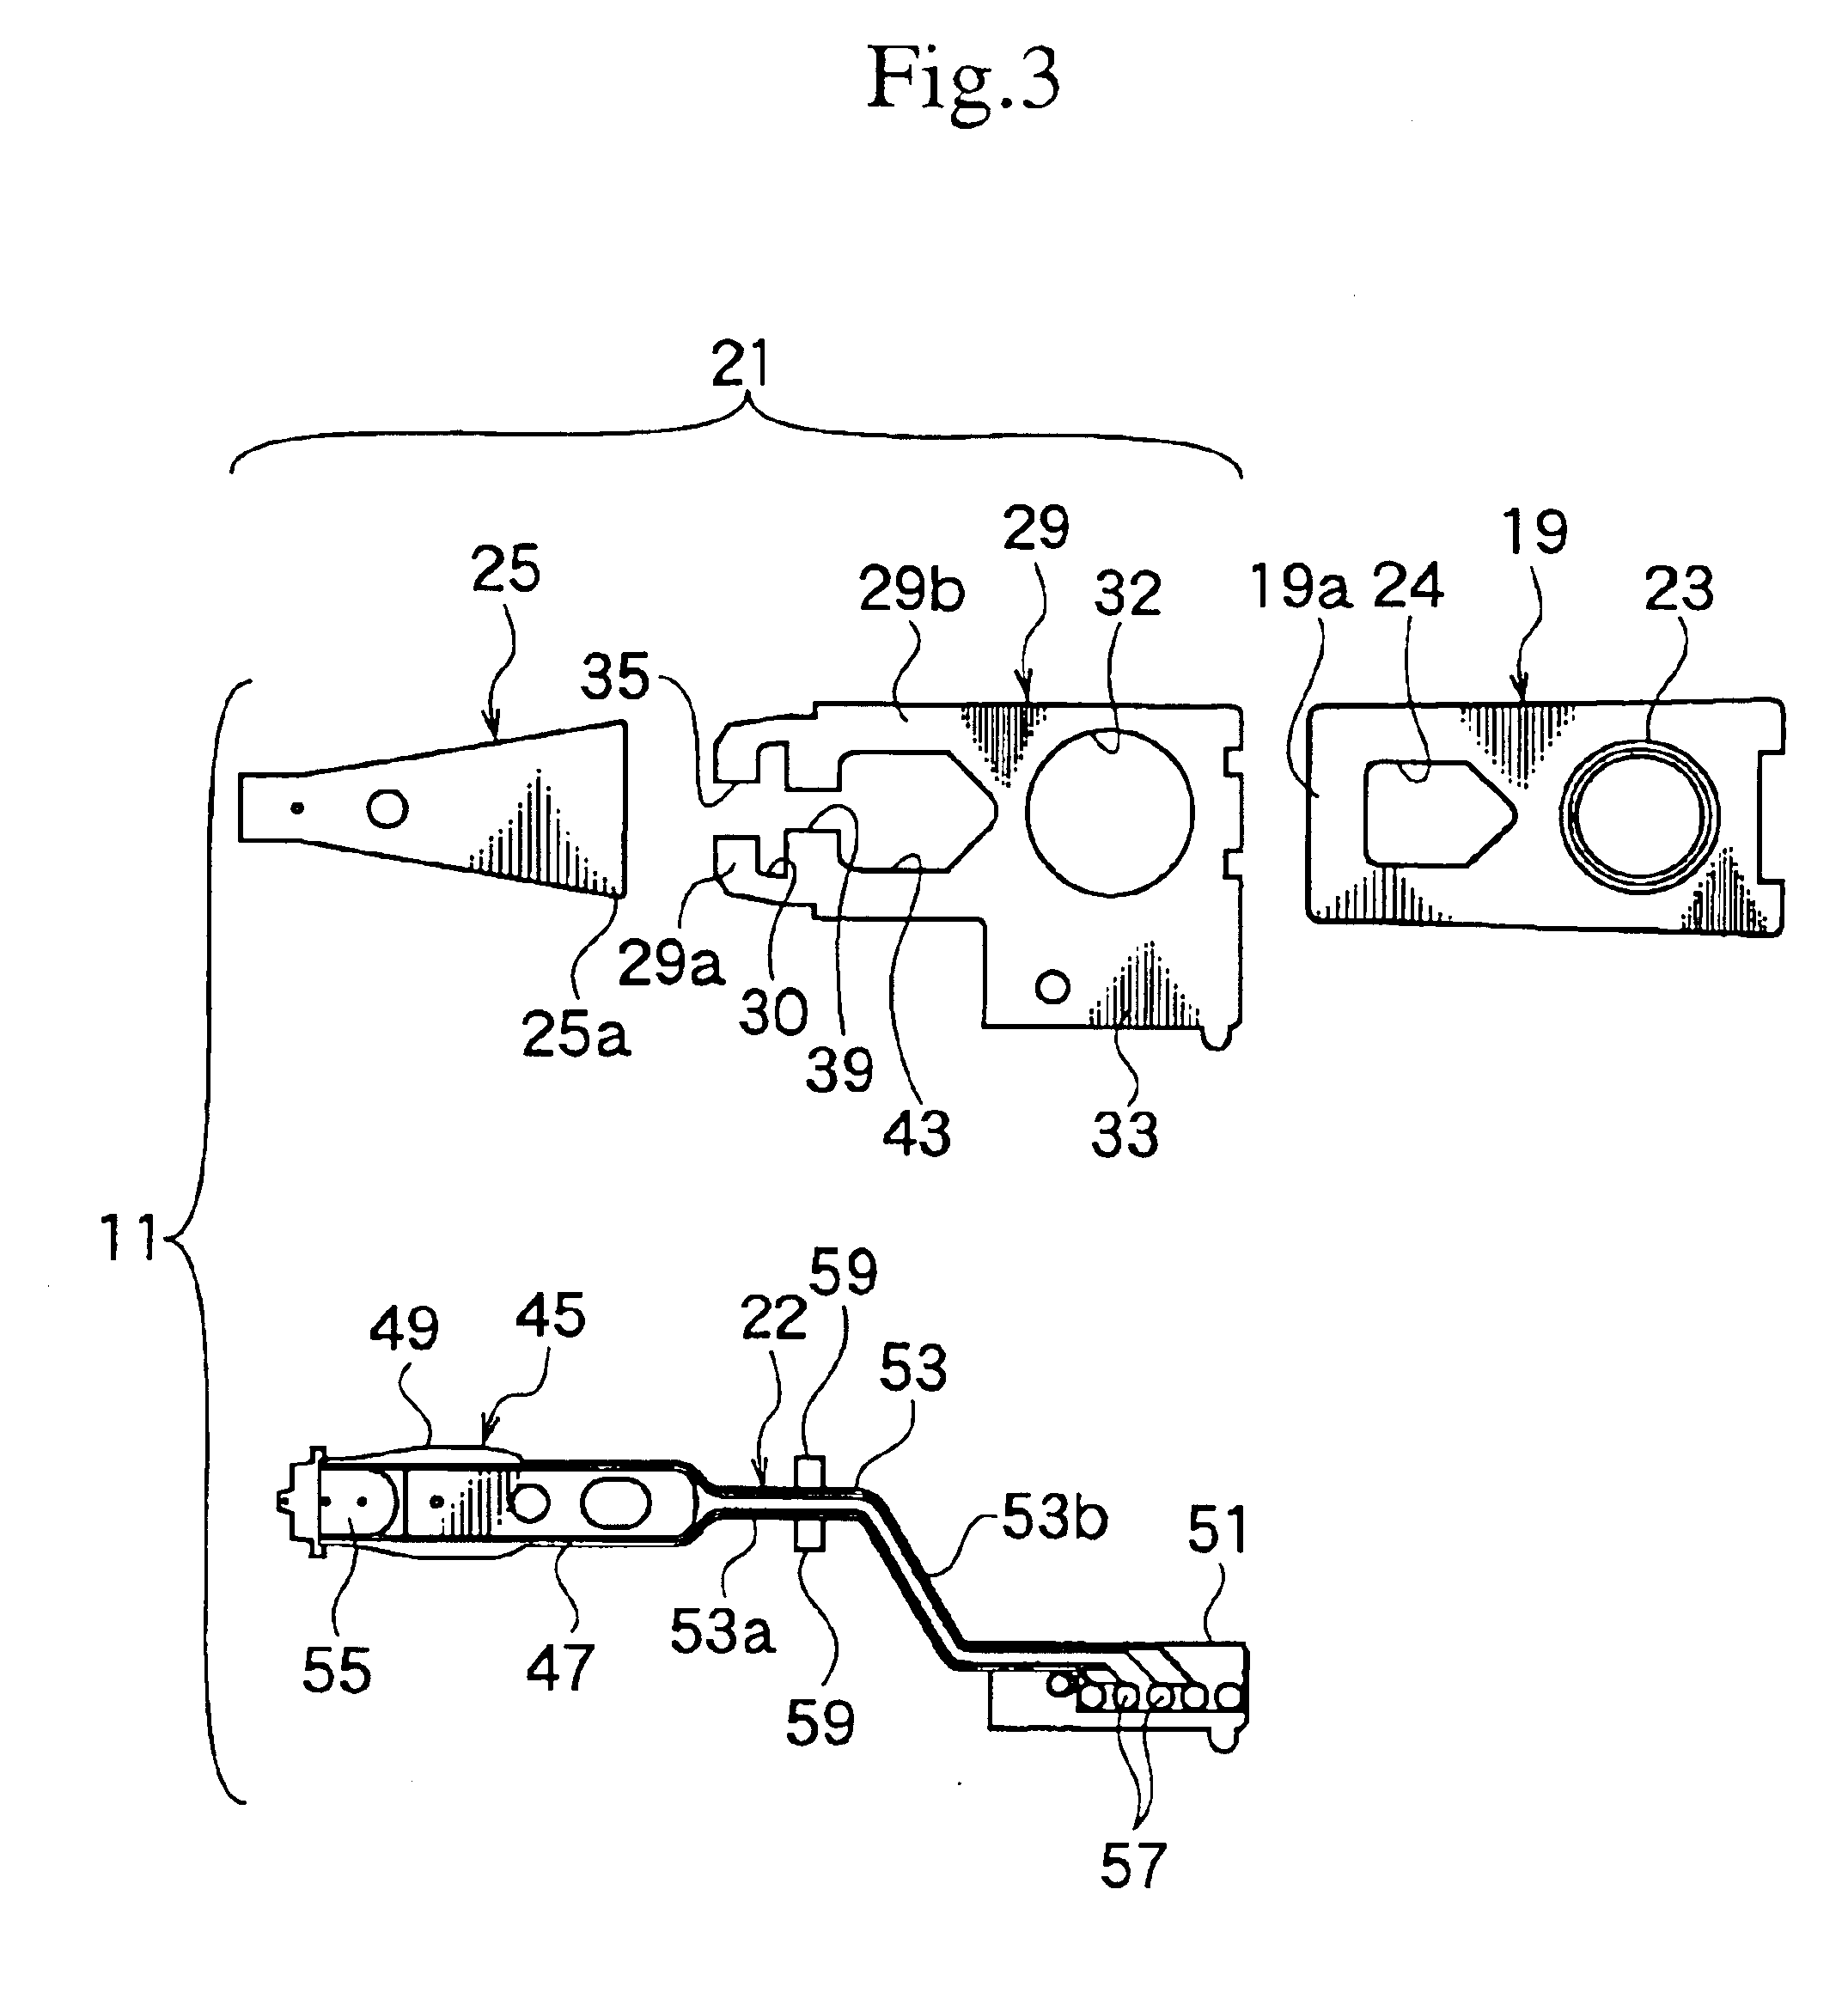 Head suspension for disk drive